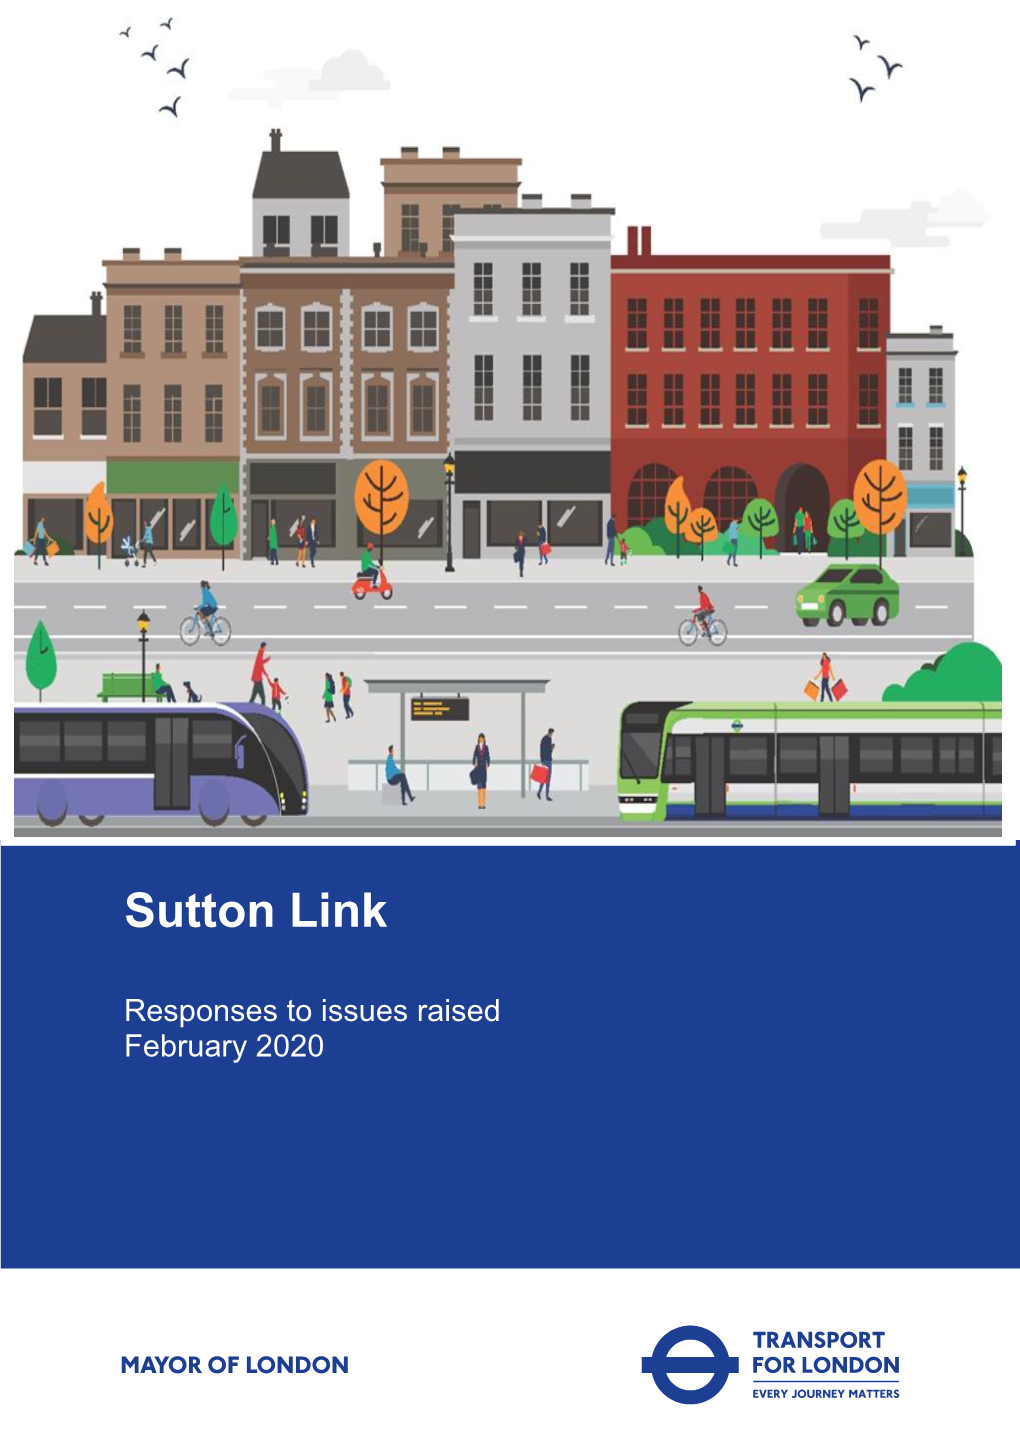 Sutton Link Responses to Issues Raised